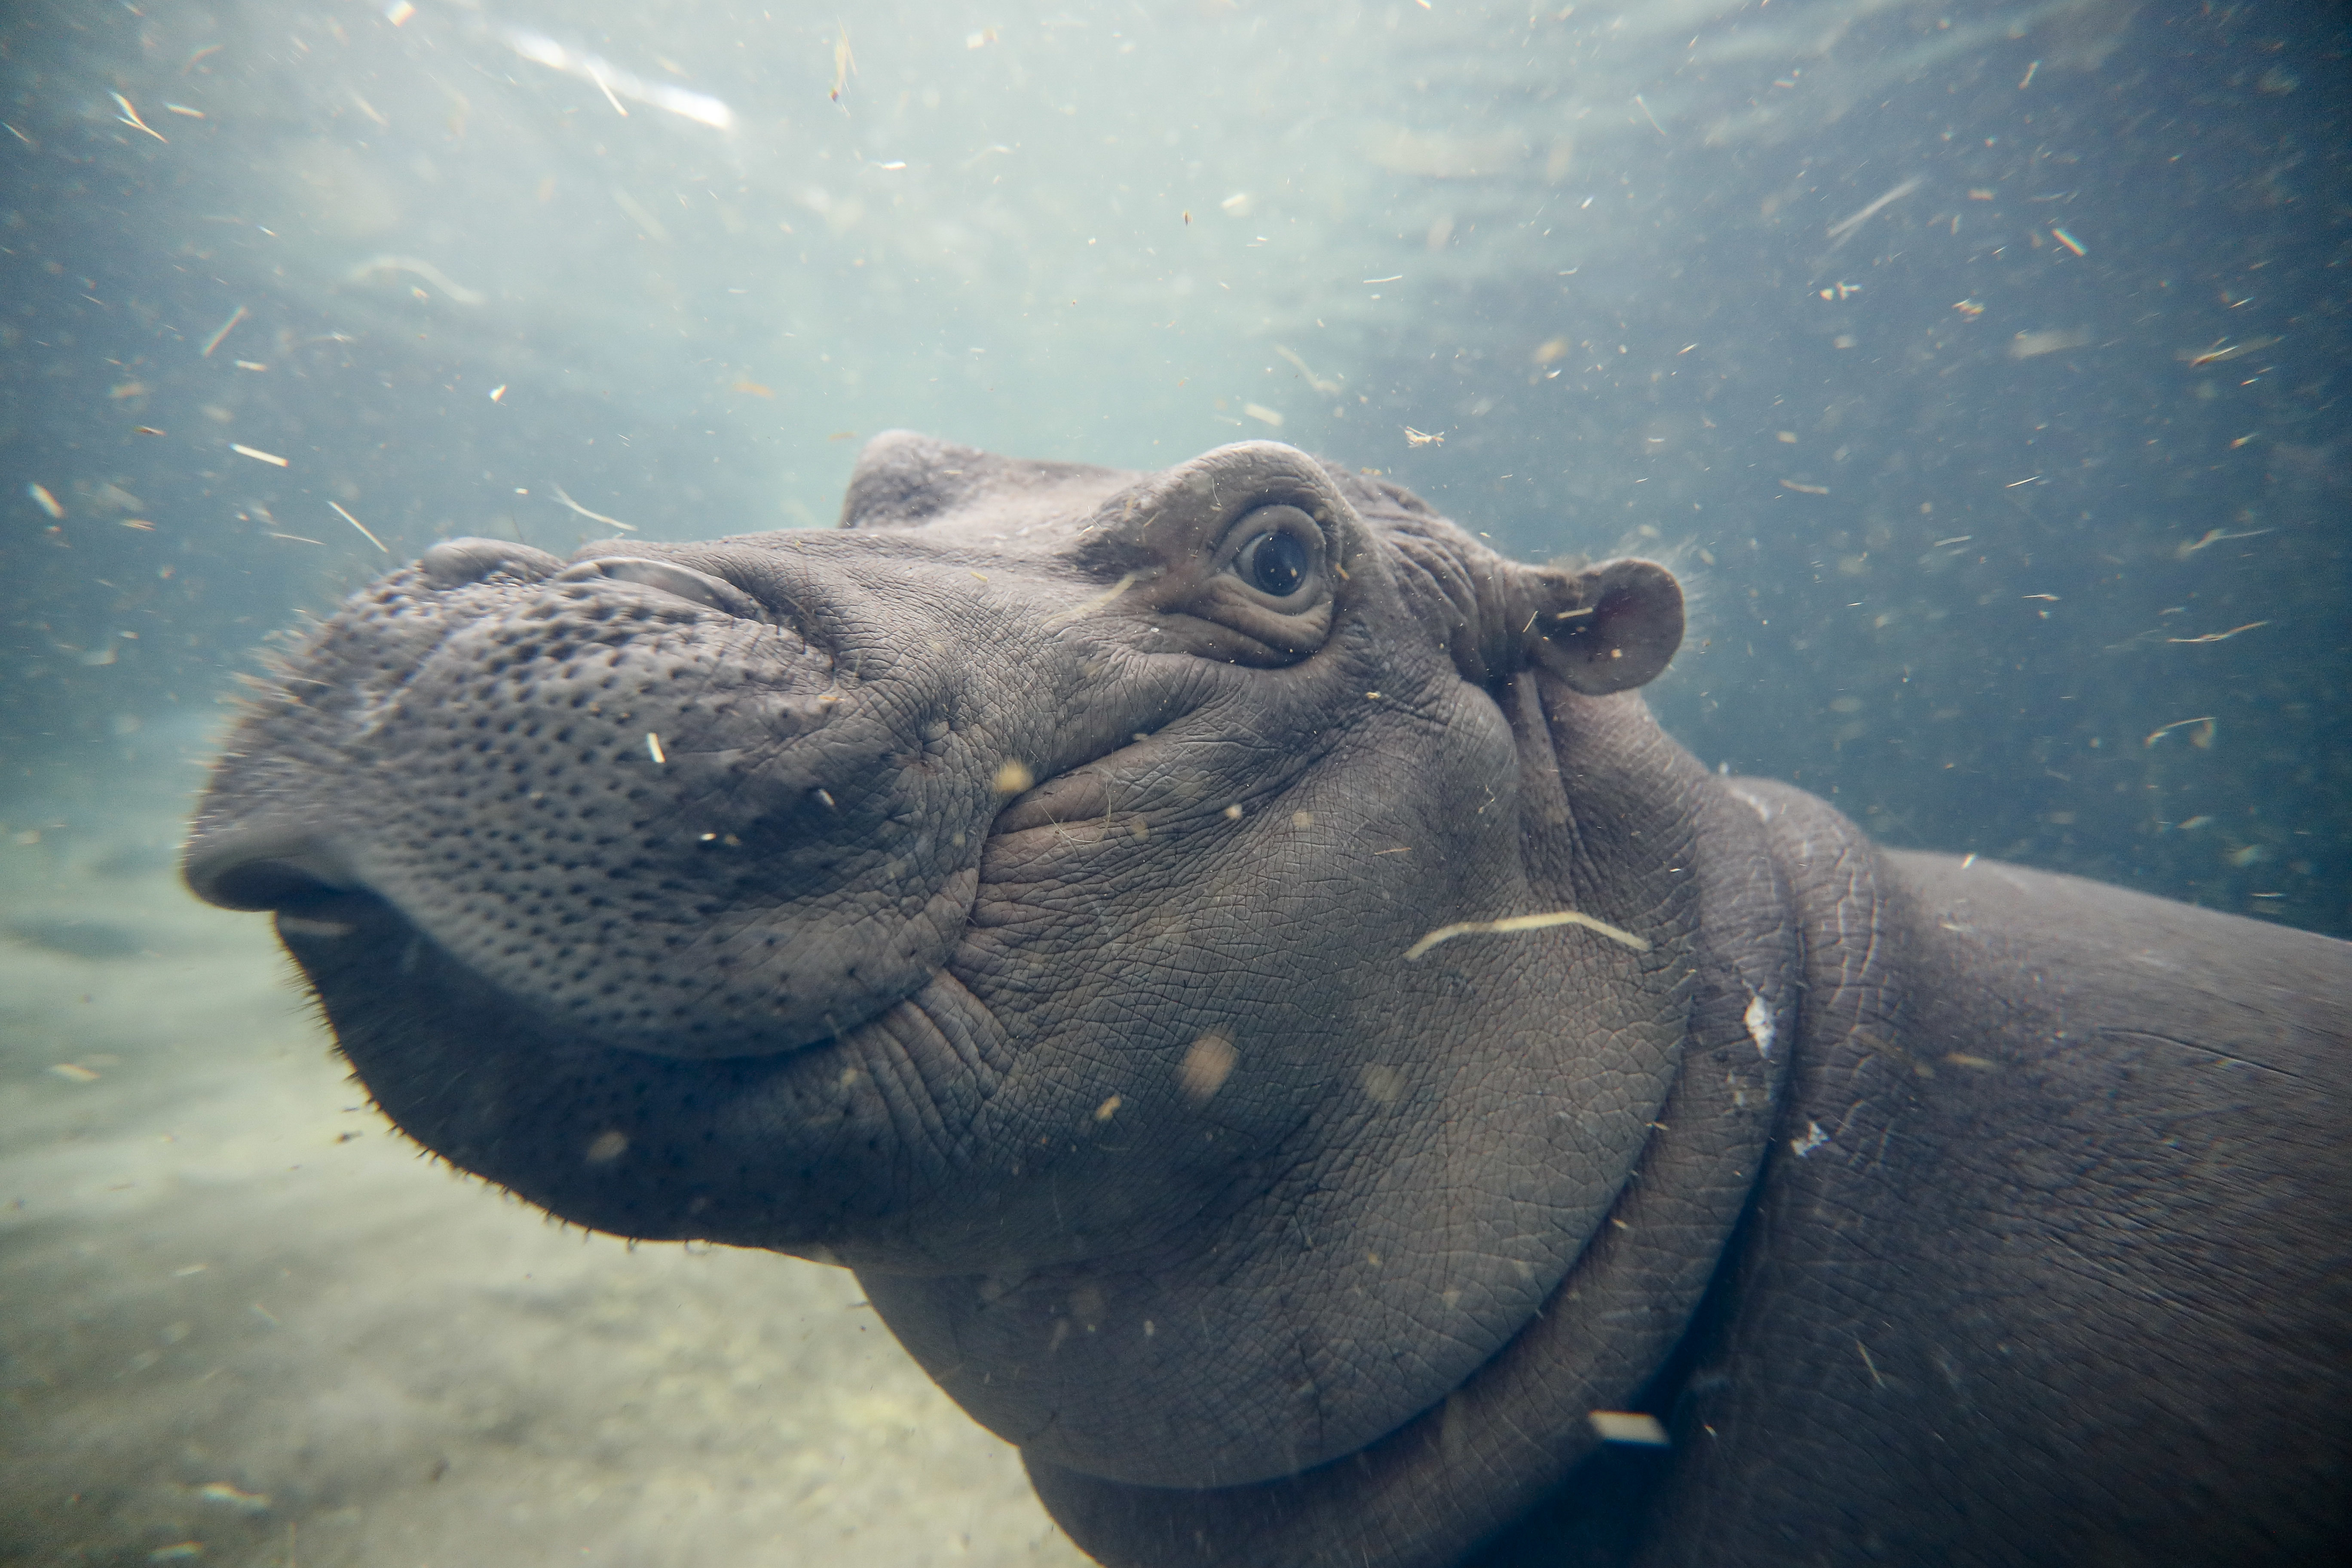 Fiona the Hippo Has Sold Nearly $500,000 in Merchandise for the Cincinnati Zoo